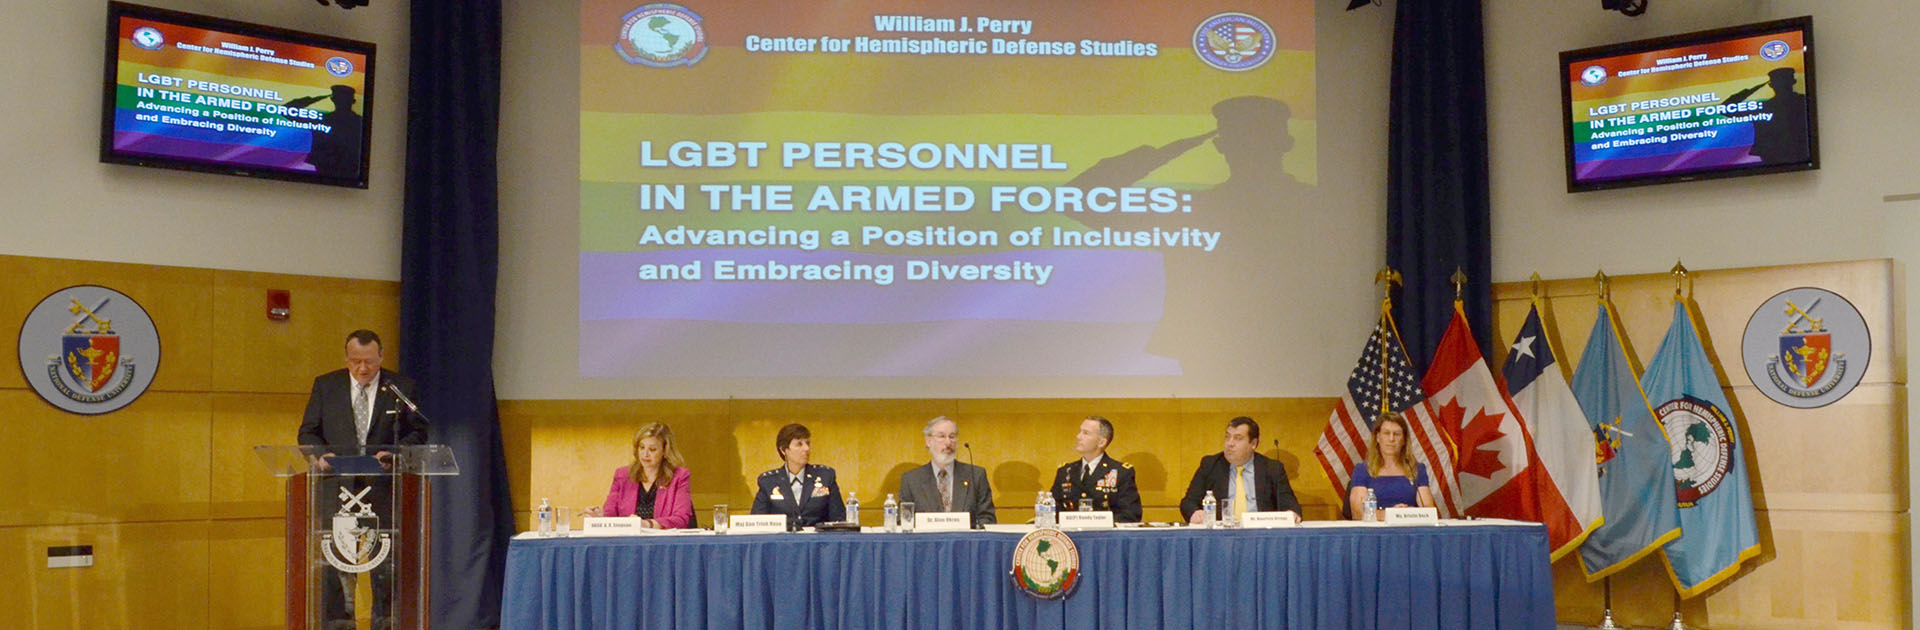 Hemispheric Forum - LGBT Personnel in the Armed Forces